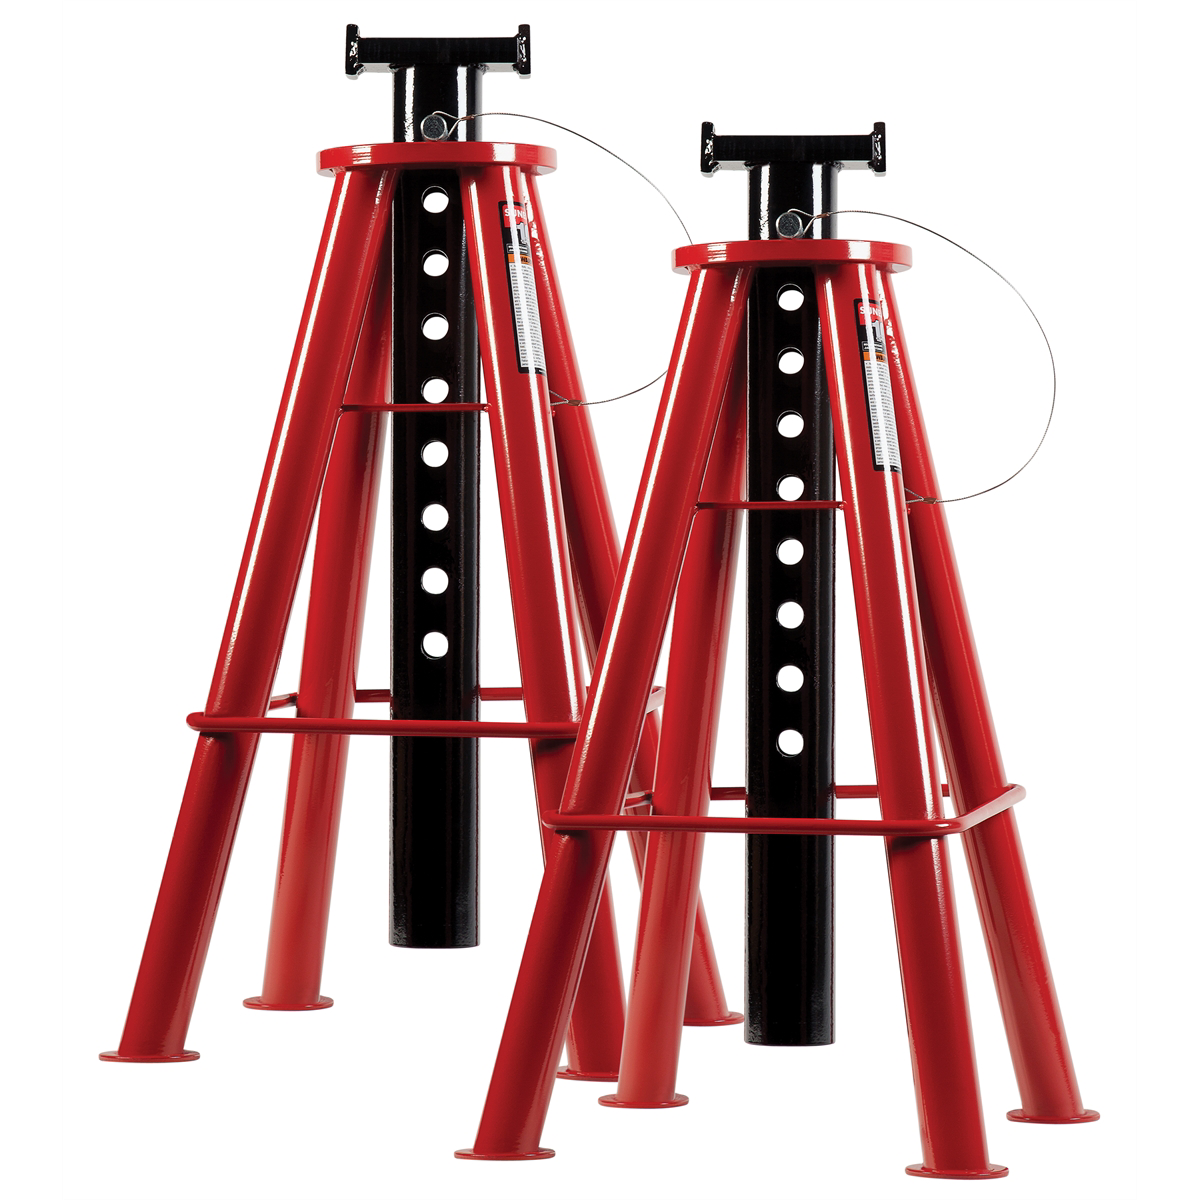 10 TON HIGH HEIGHT PIN TYPE JACK STANDS (PAIR)